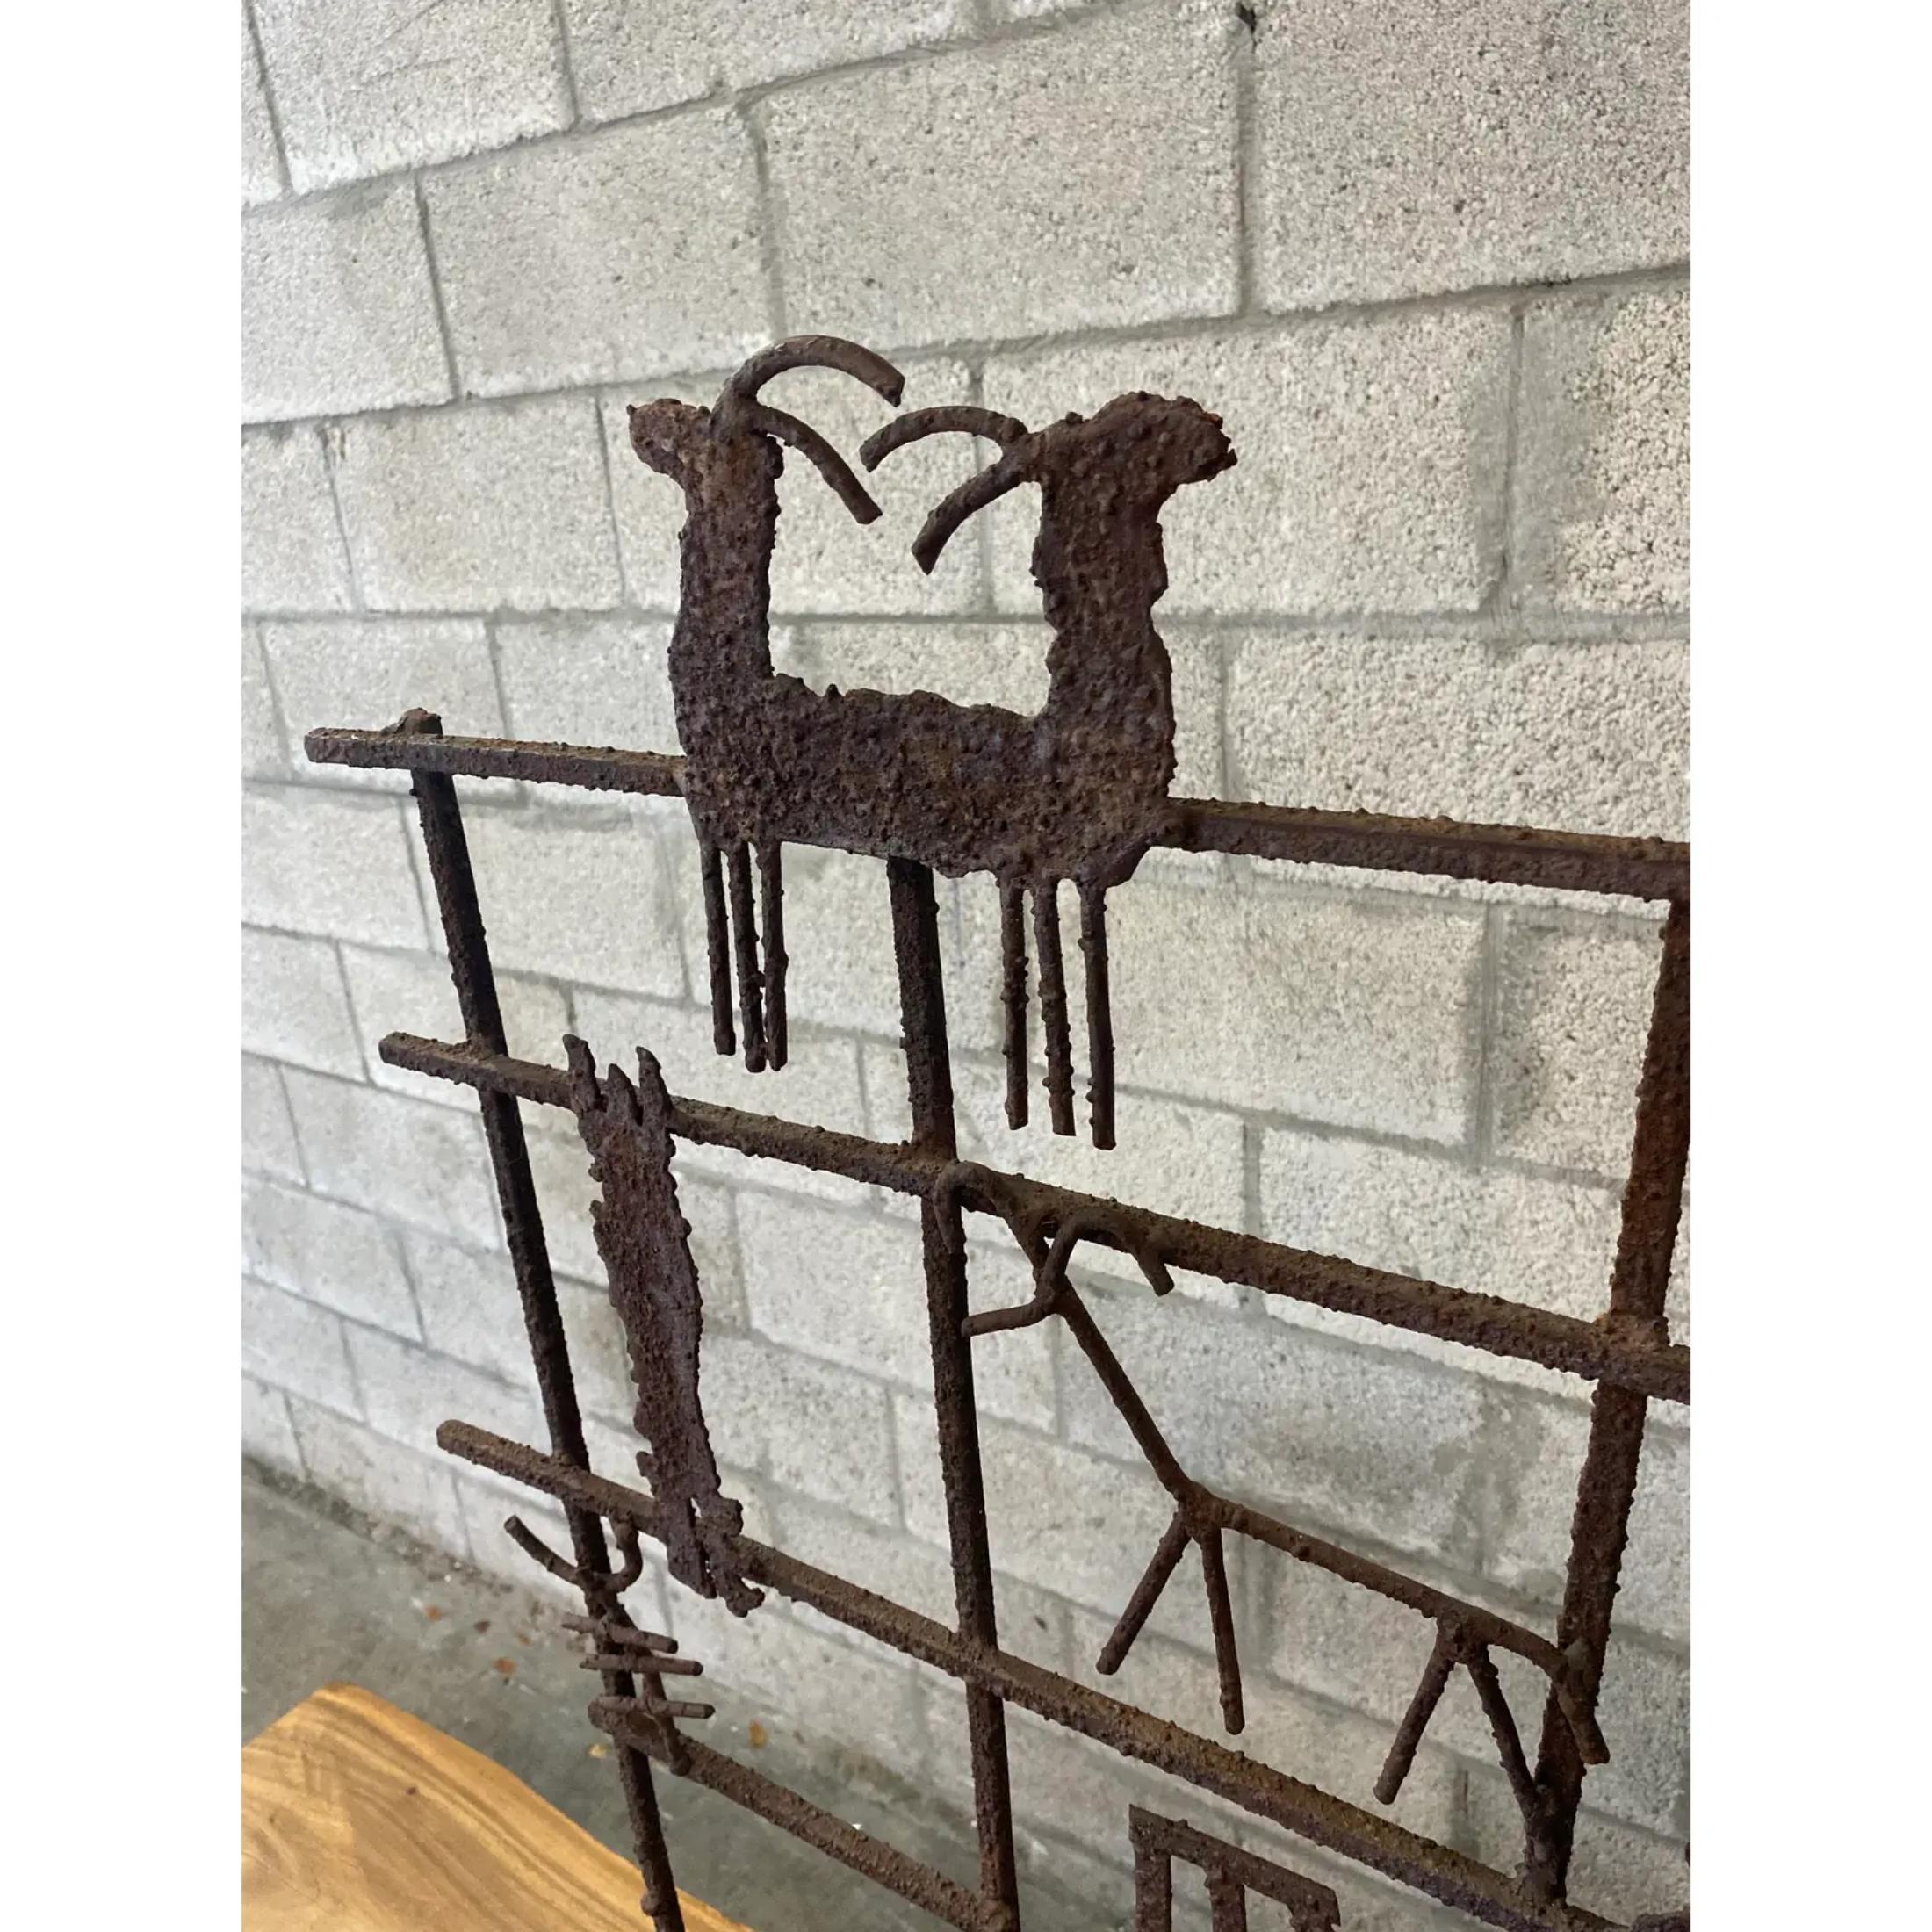 Fantastic vintage hand forged fire screen. A brilliant collection of gnarly icons placed randomly on a heavy grid. A real artistic masterpiece. Great to add some drama to any fireplace